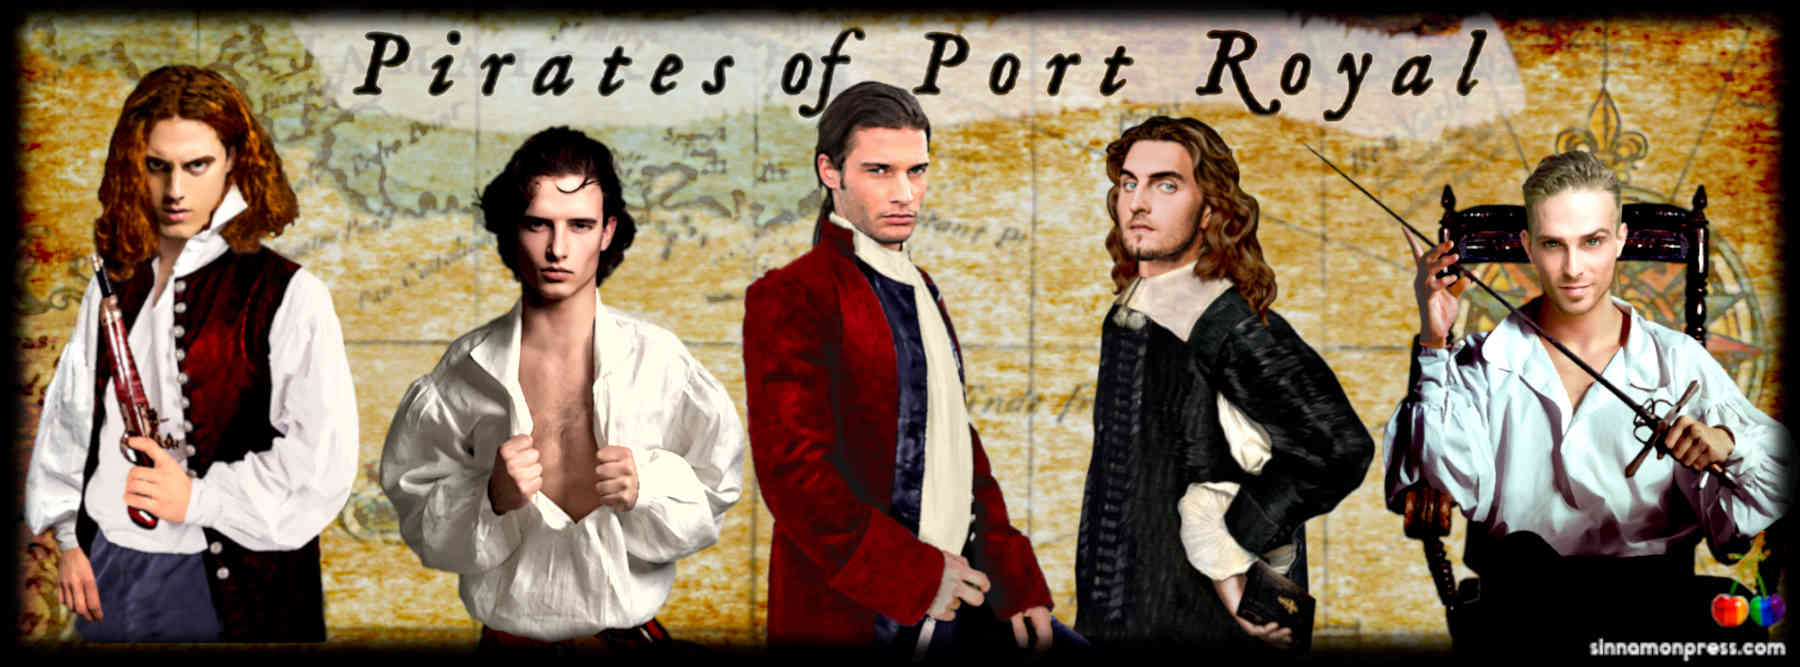 Pirates of Port Royal series by Jules Radcliffe